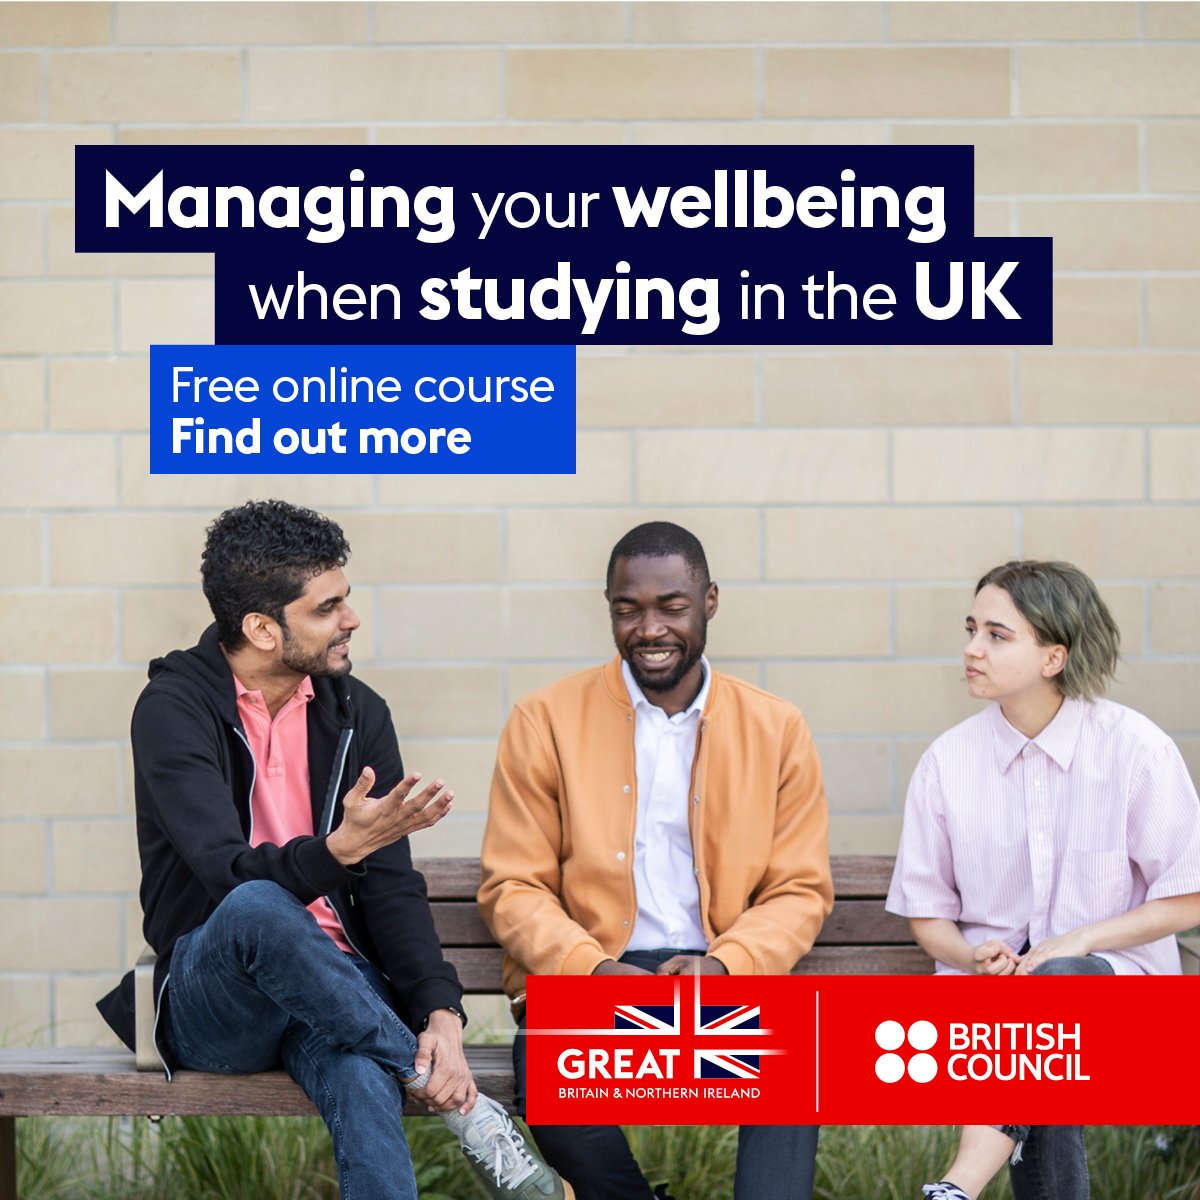 ⏰ Last call to join our free online course: ‘Managing Wellbeing for International Students in the UK’! Develop personal resilience, reduce stress, and access valuable support and resources. Enrol now: bit.ly/bcwellbeingmooc #StudyUK #WellbeingMOOC #InternationalStudentUK